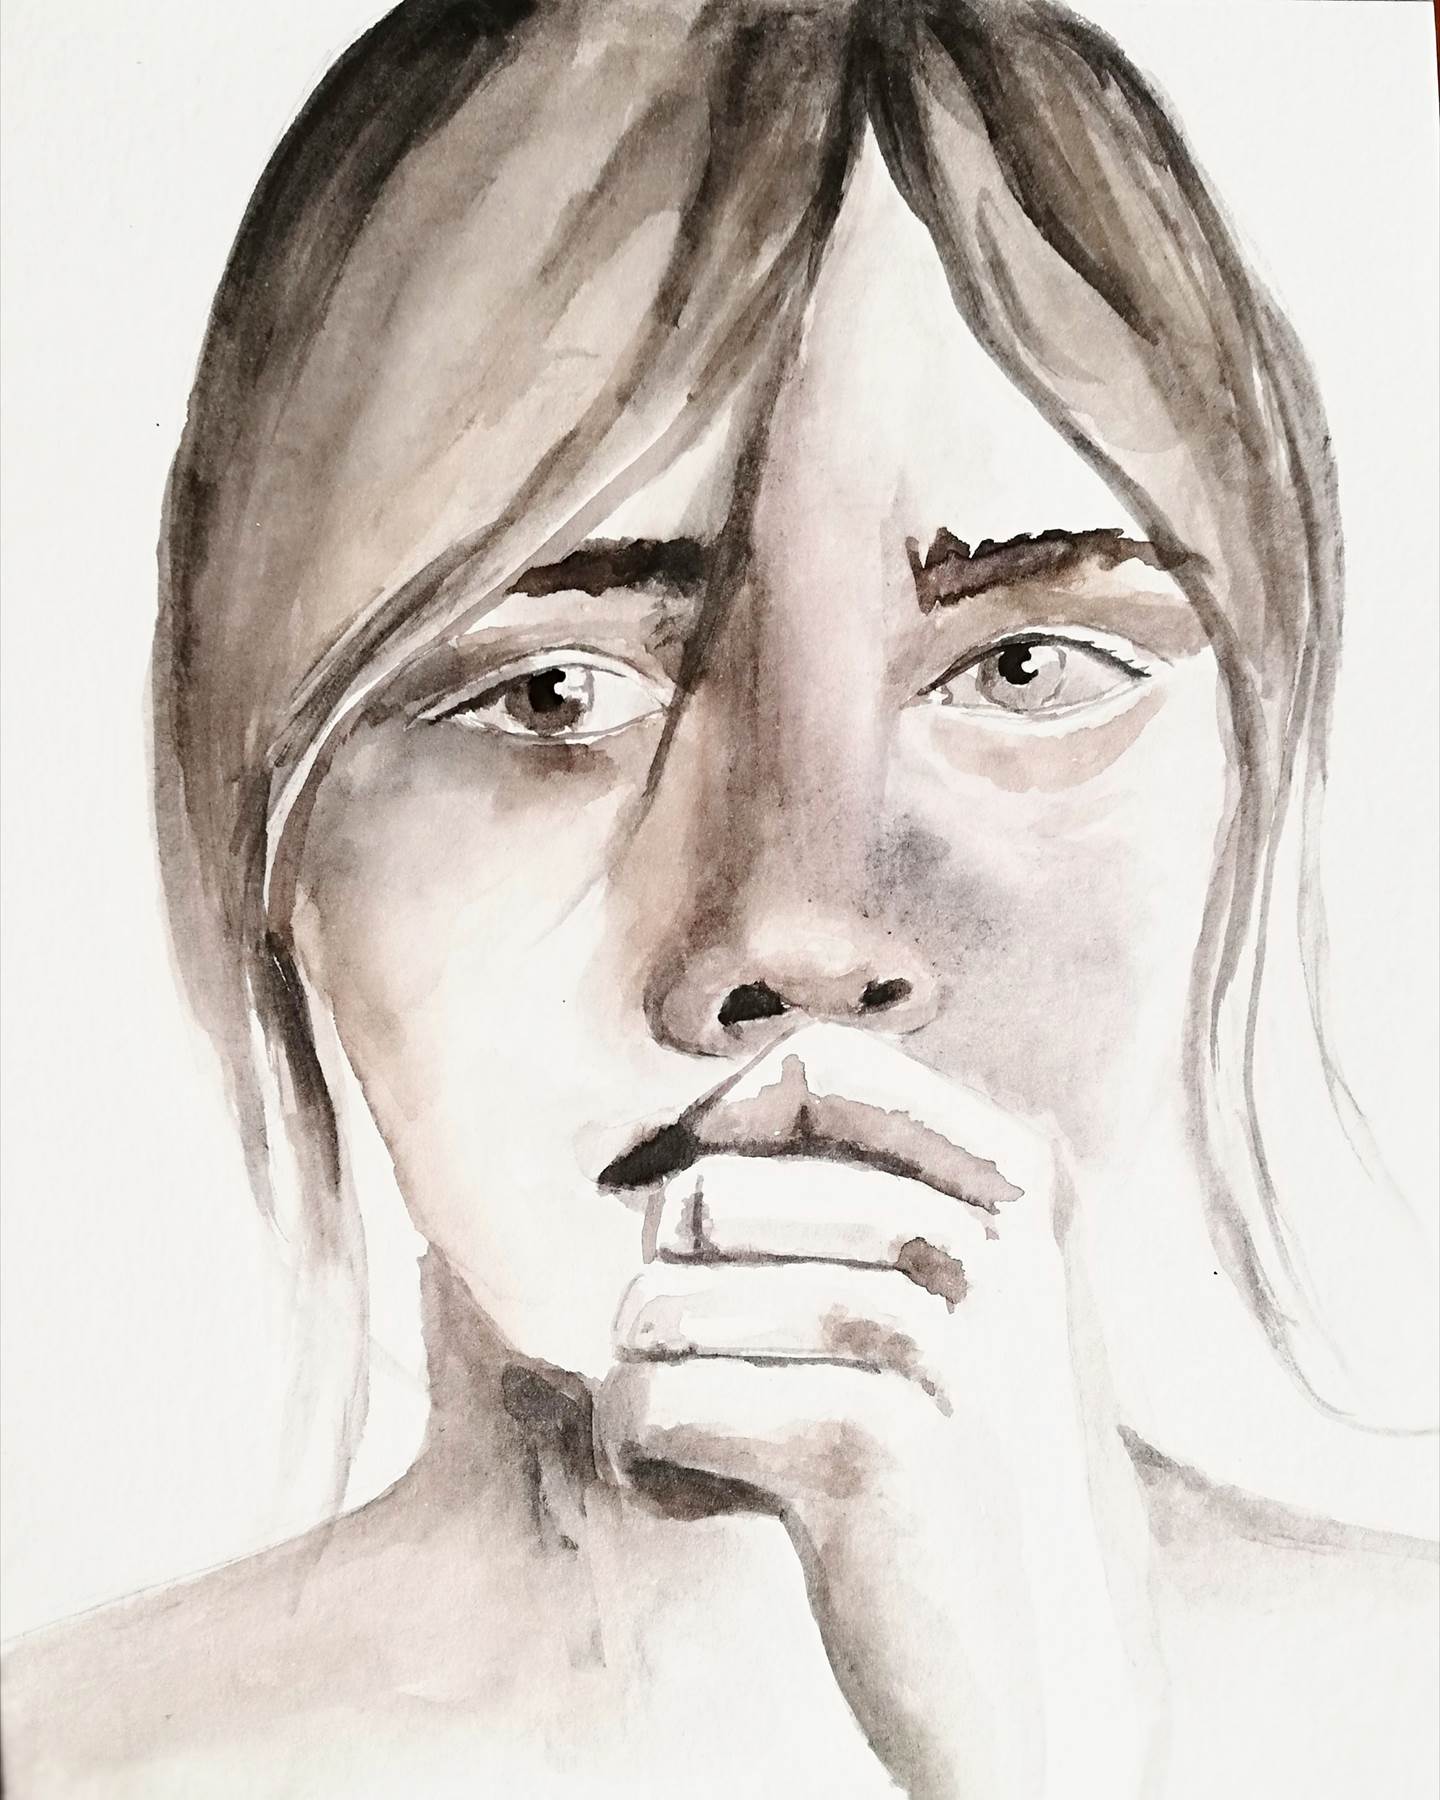 Can you feel what I am feeling?, original Human Figure Watercolor Painting by Ana Maria Costa